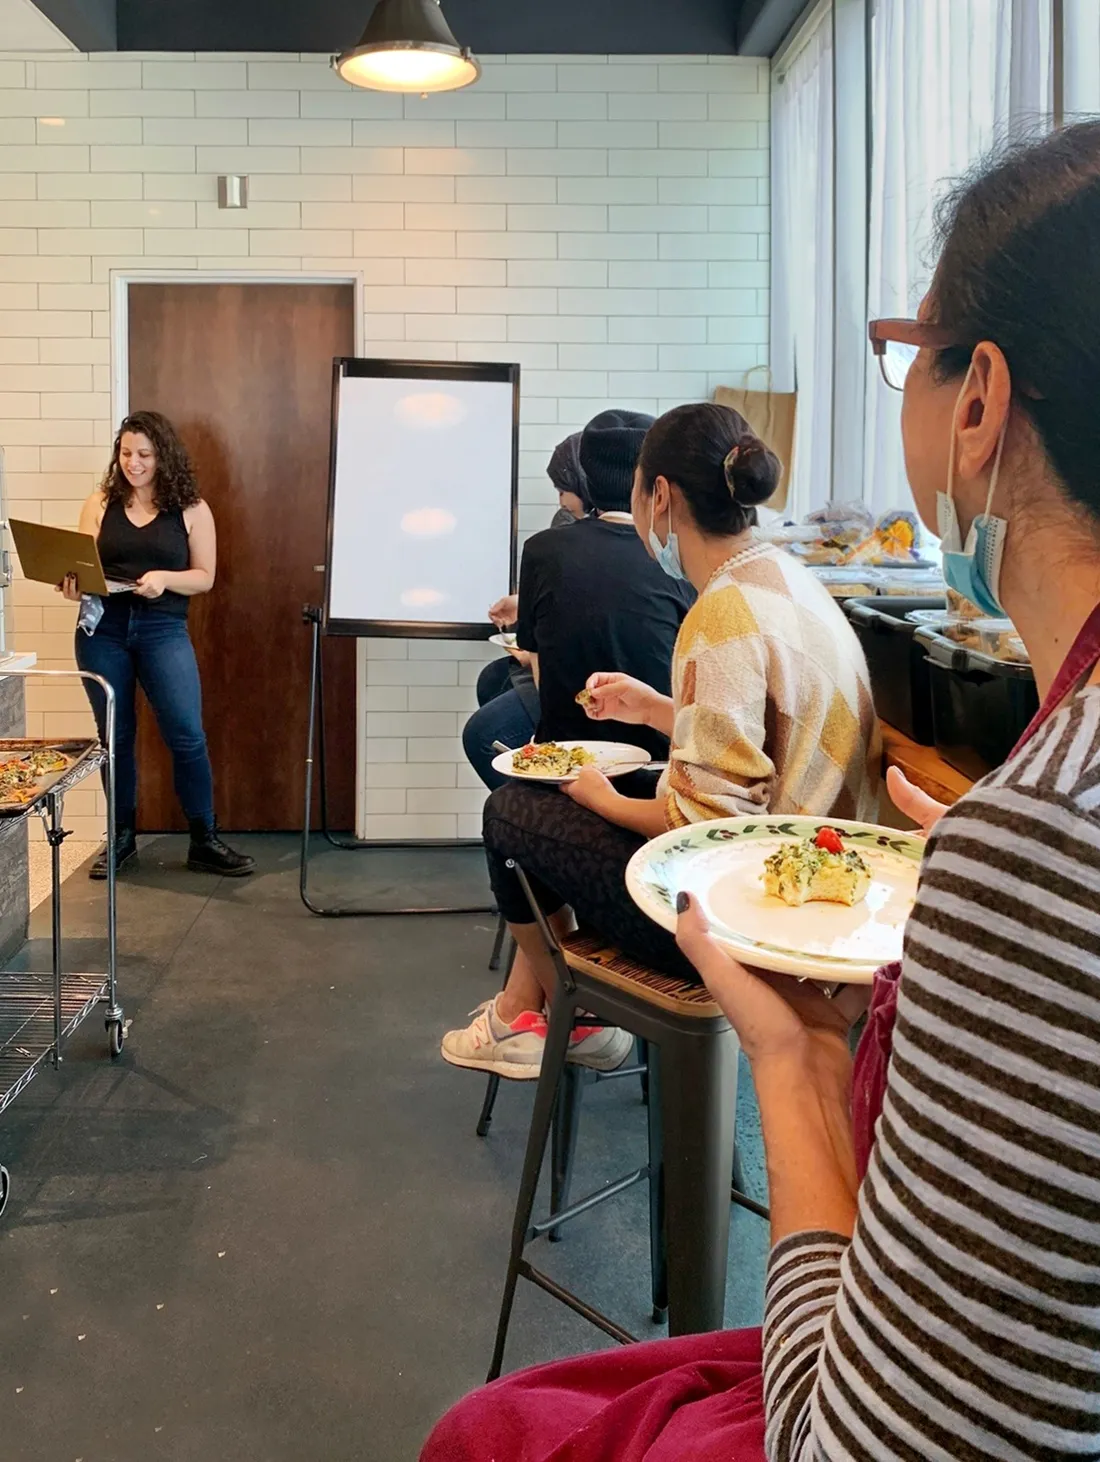 Cara Santino standing at the front of a room next to a whiteboard, speaking to a group of people sitting at small tables with plates of food.